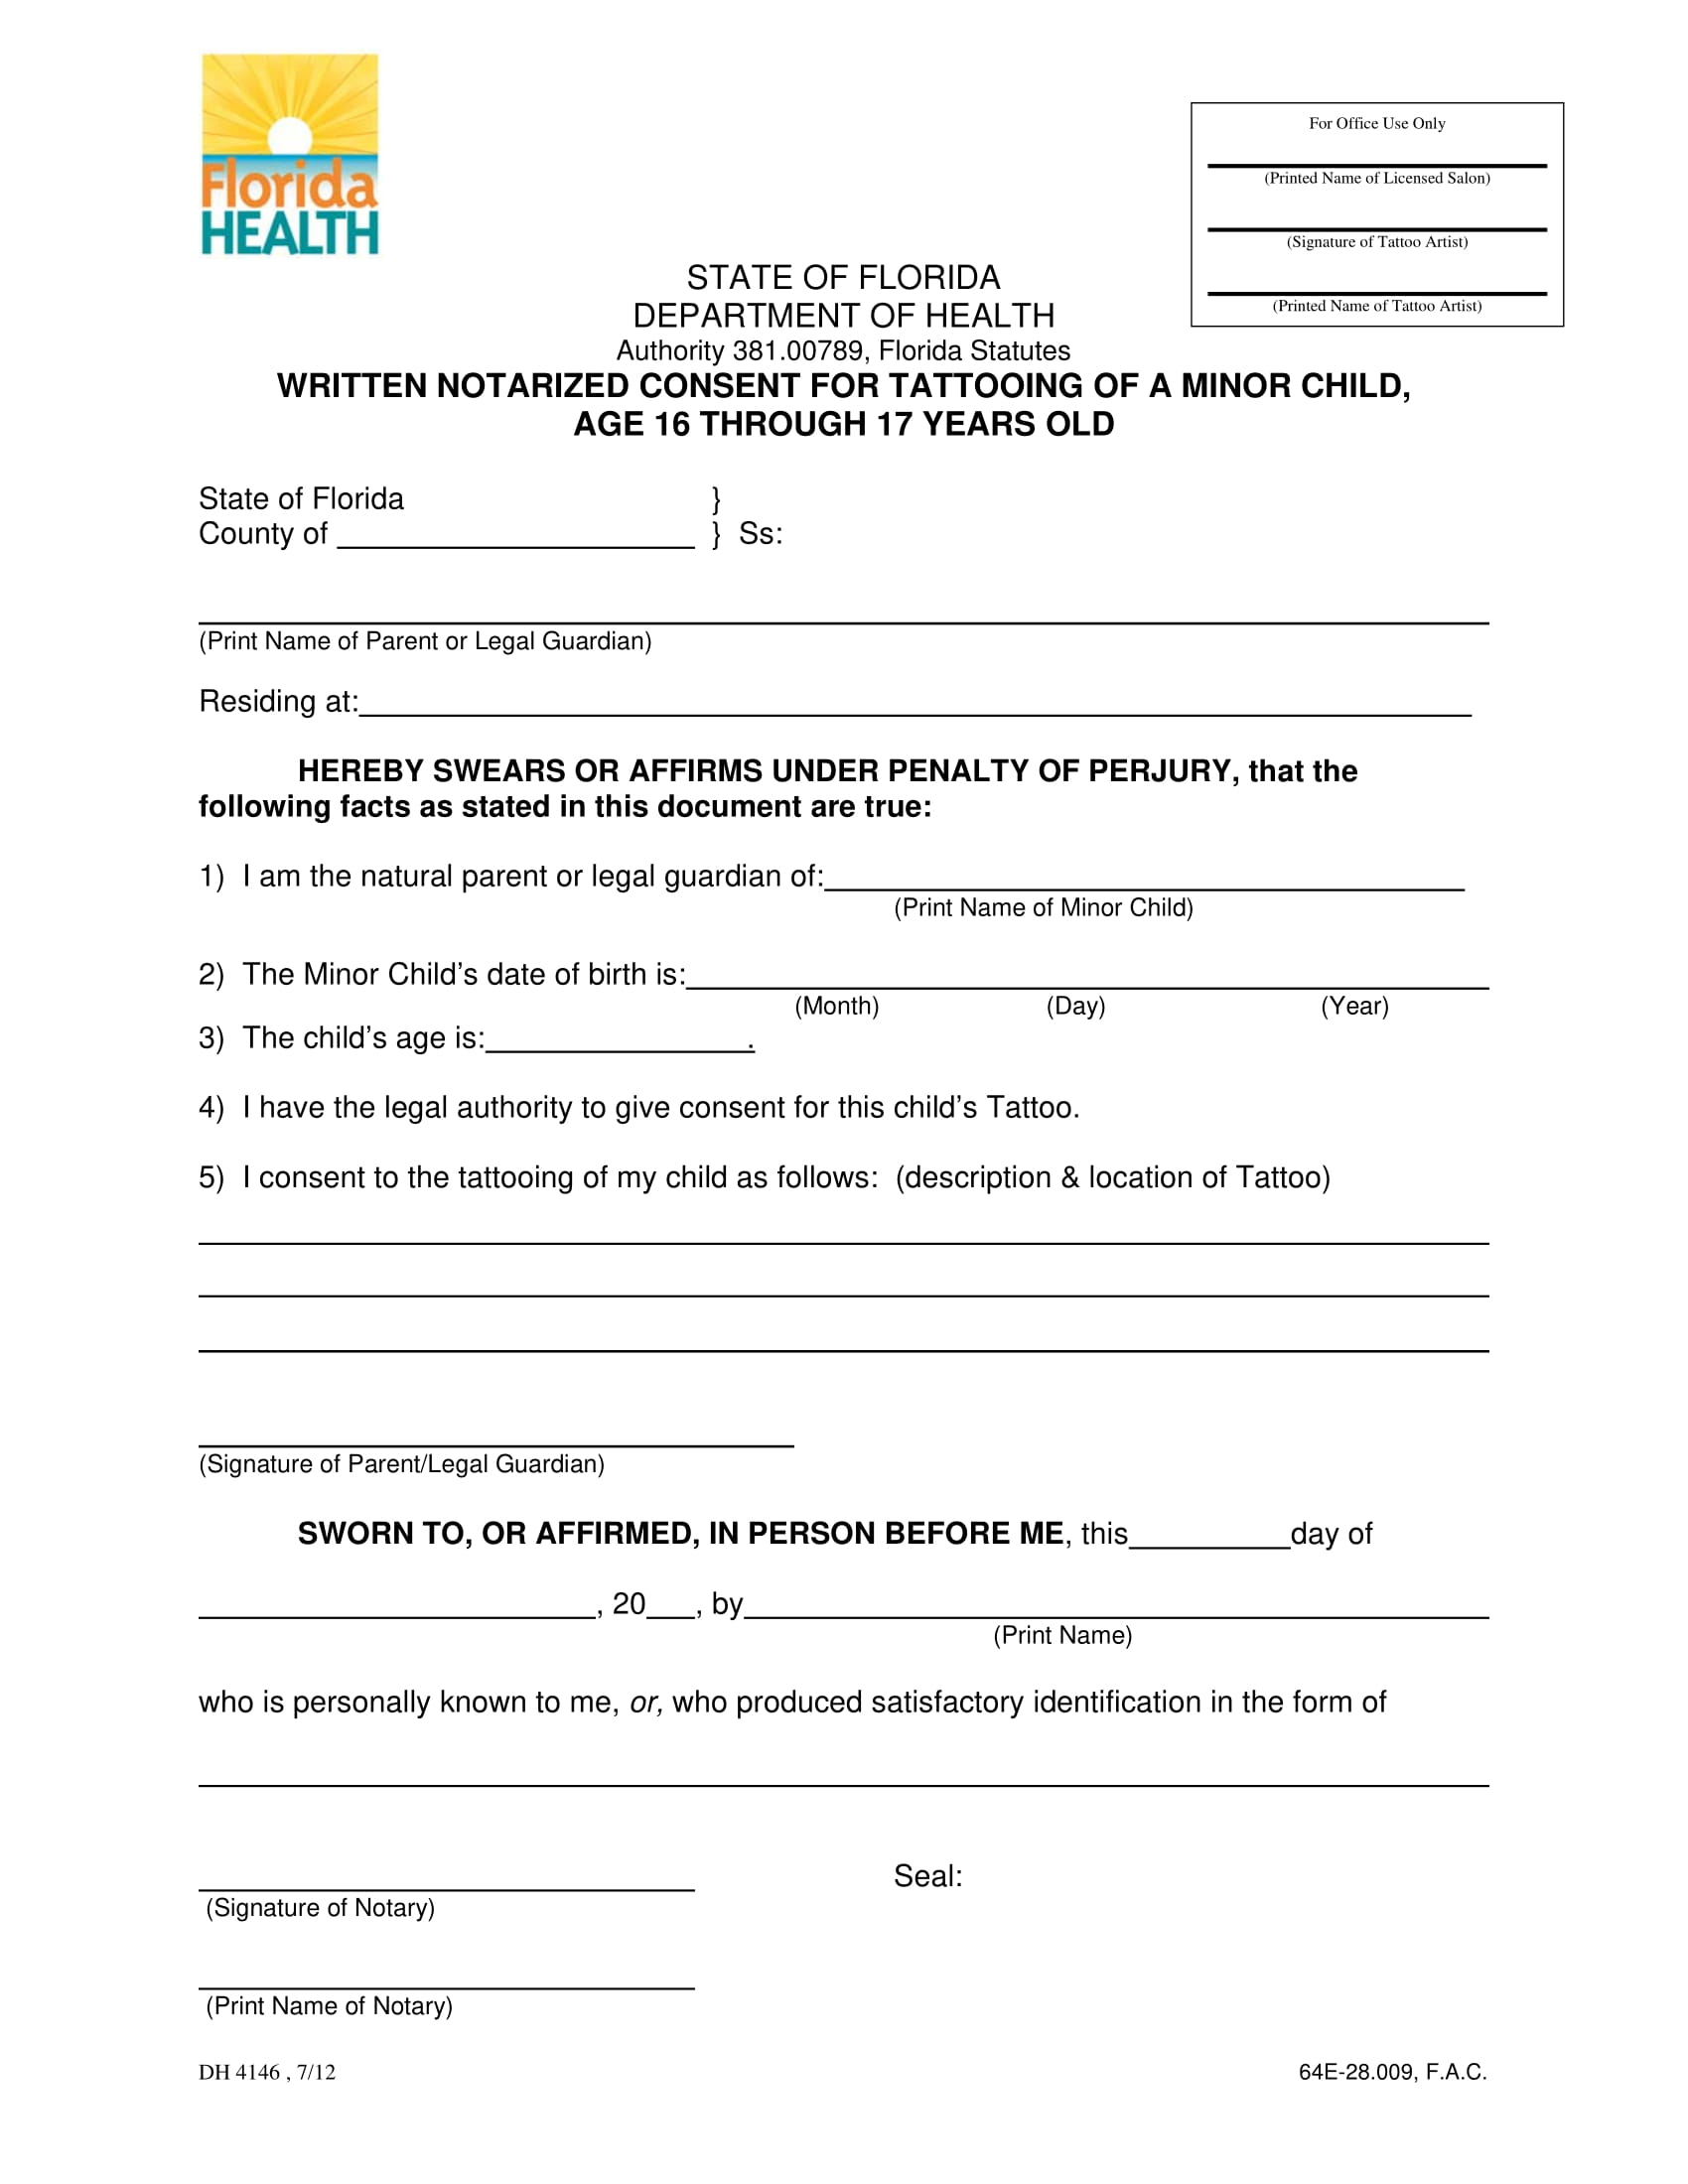 FREE 6 Tattoo Consent Forms In PDF